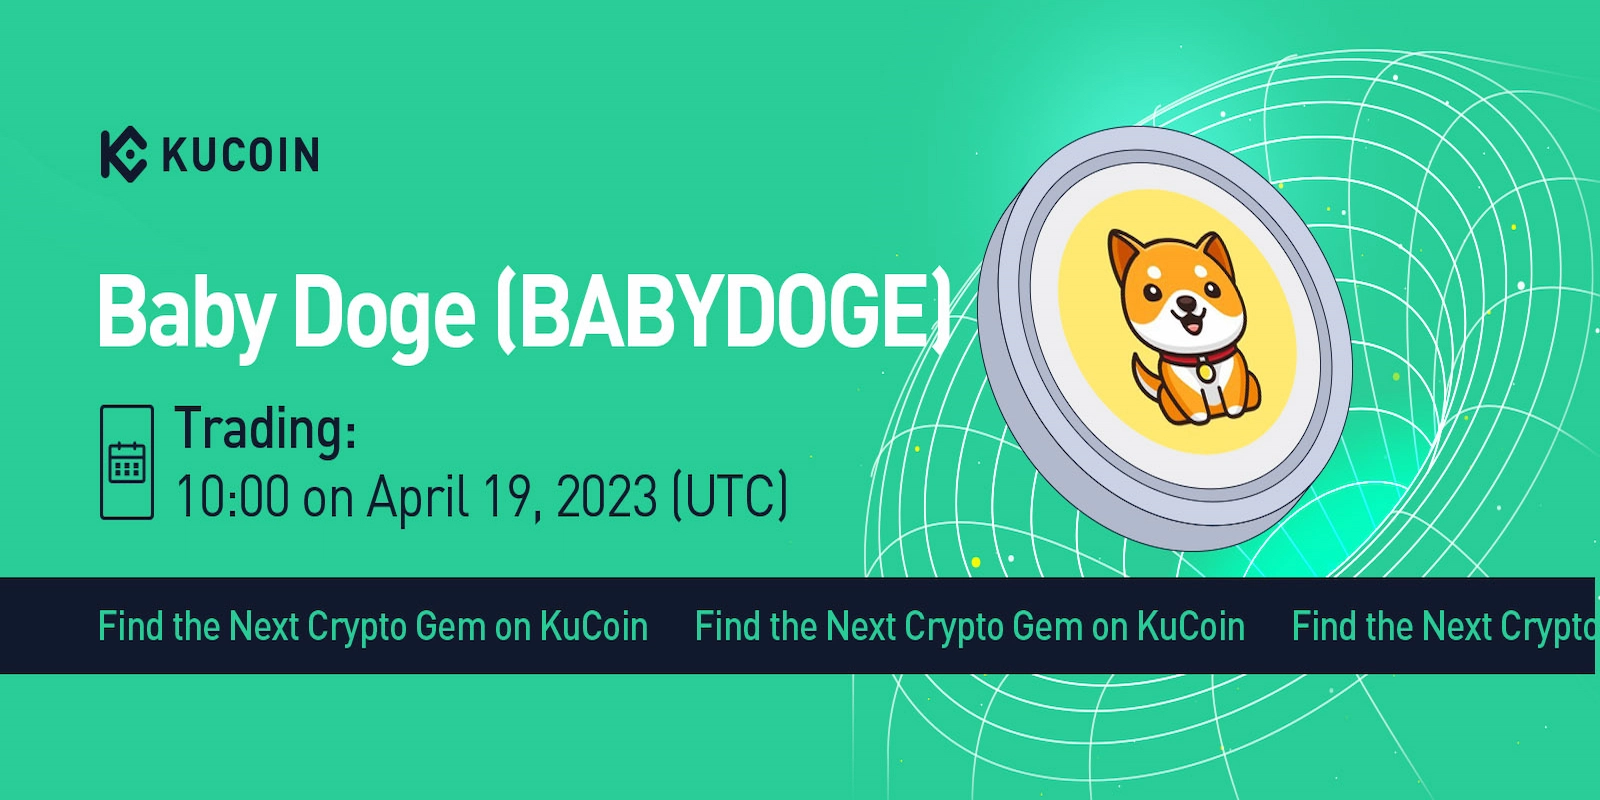 Kucoin announced listing the BABYDOGE token on its platform.